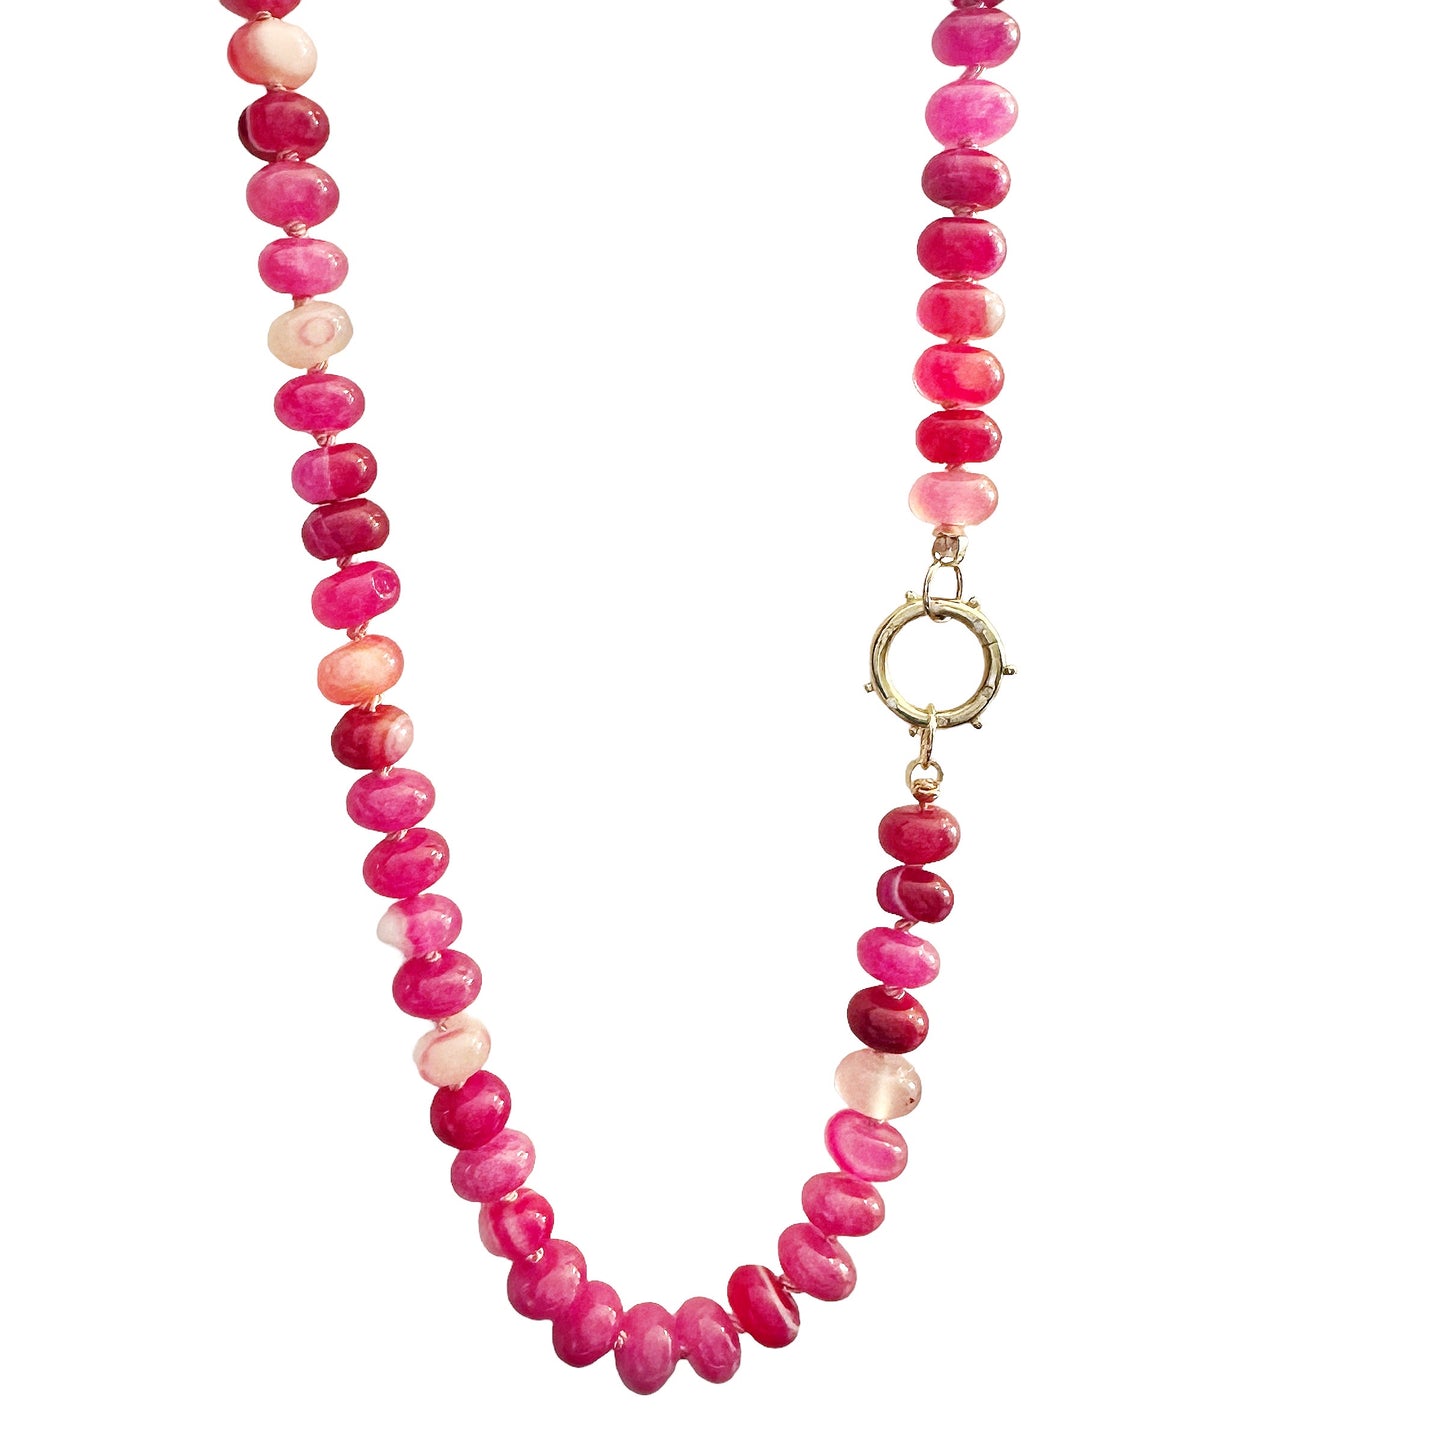 Pretty Beaded Choker Tie-able Necklace in Pink - i9 Fashion